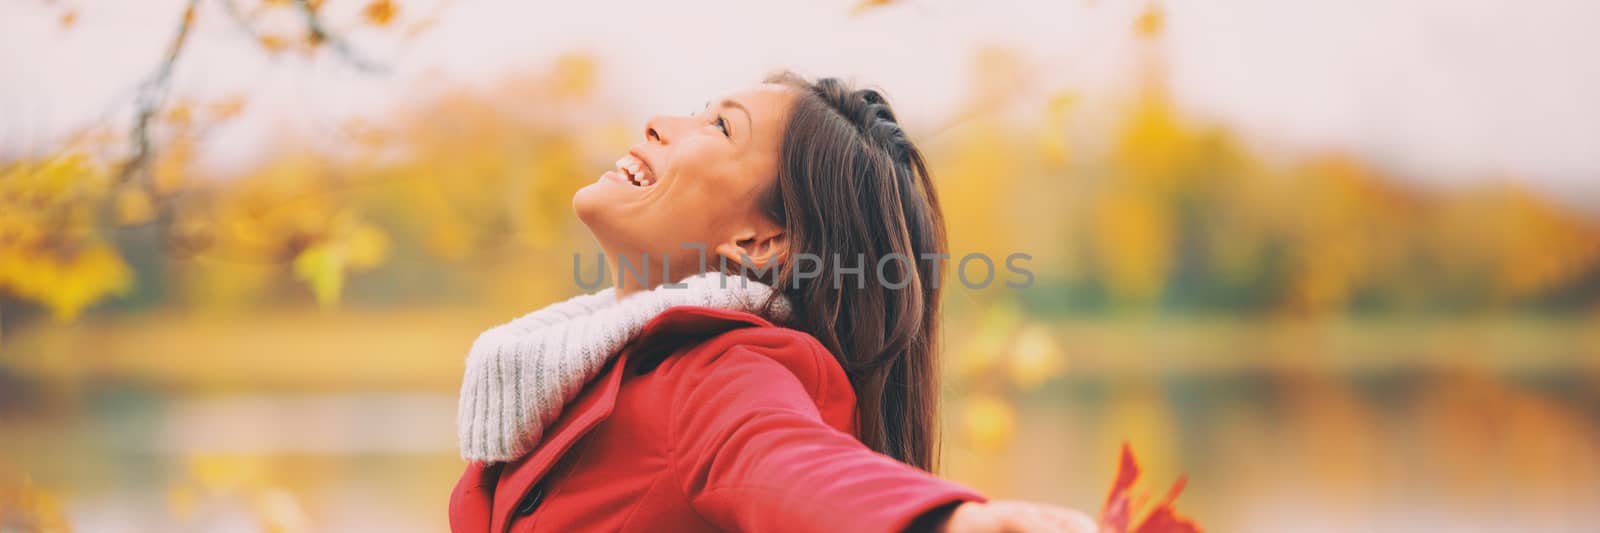 Autumn woman happy smiling feeling free in fall nature. foliage yellow colors of nature. Asian girl by the lake panoramic banner landscape. by Maridav